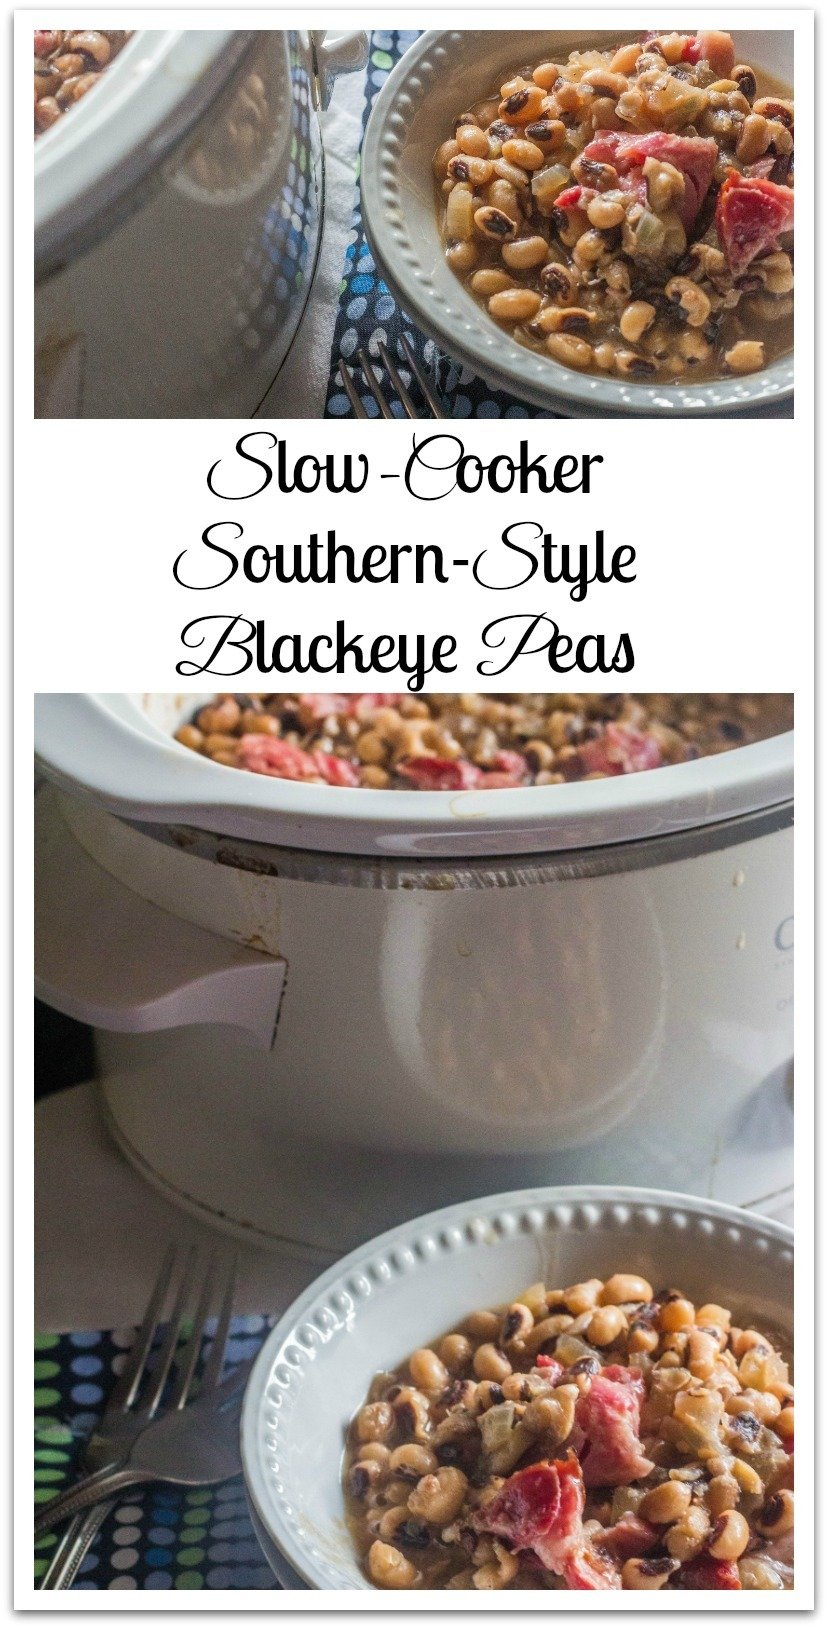 Slow-Cooker Southern-Style Blackeyed Peas are a part of the traditional Southern New Year's Day menu and represent good luck for the rest of the year. #BlackeyedPeas #SlowCooker